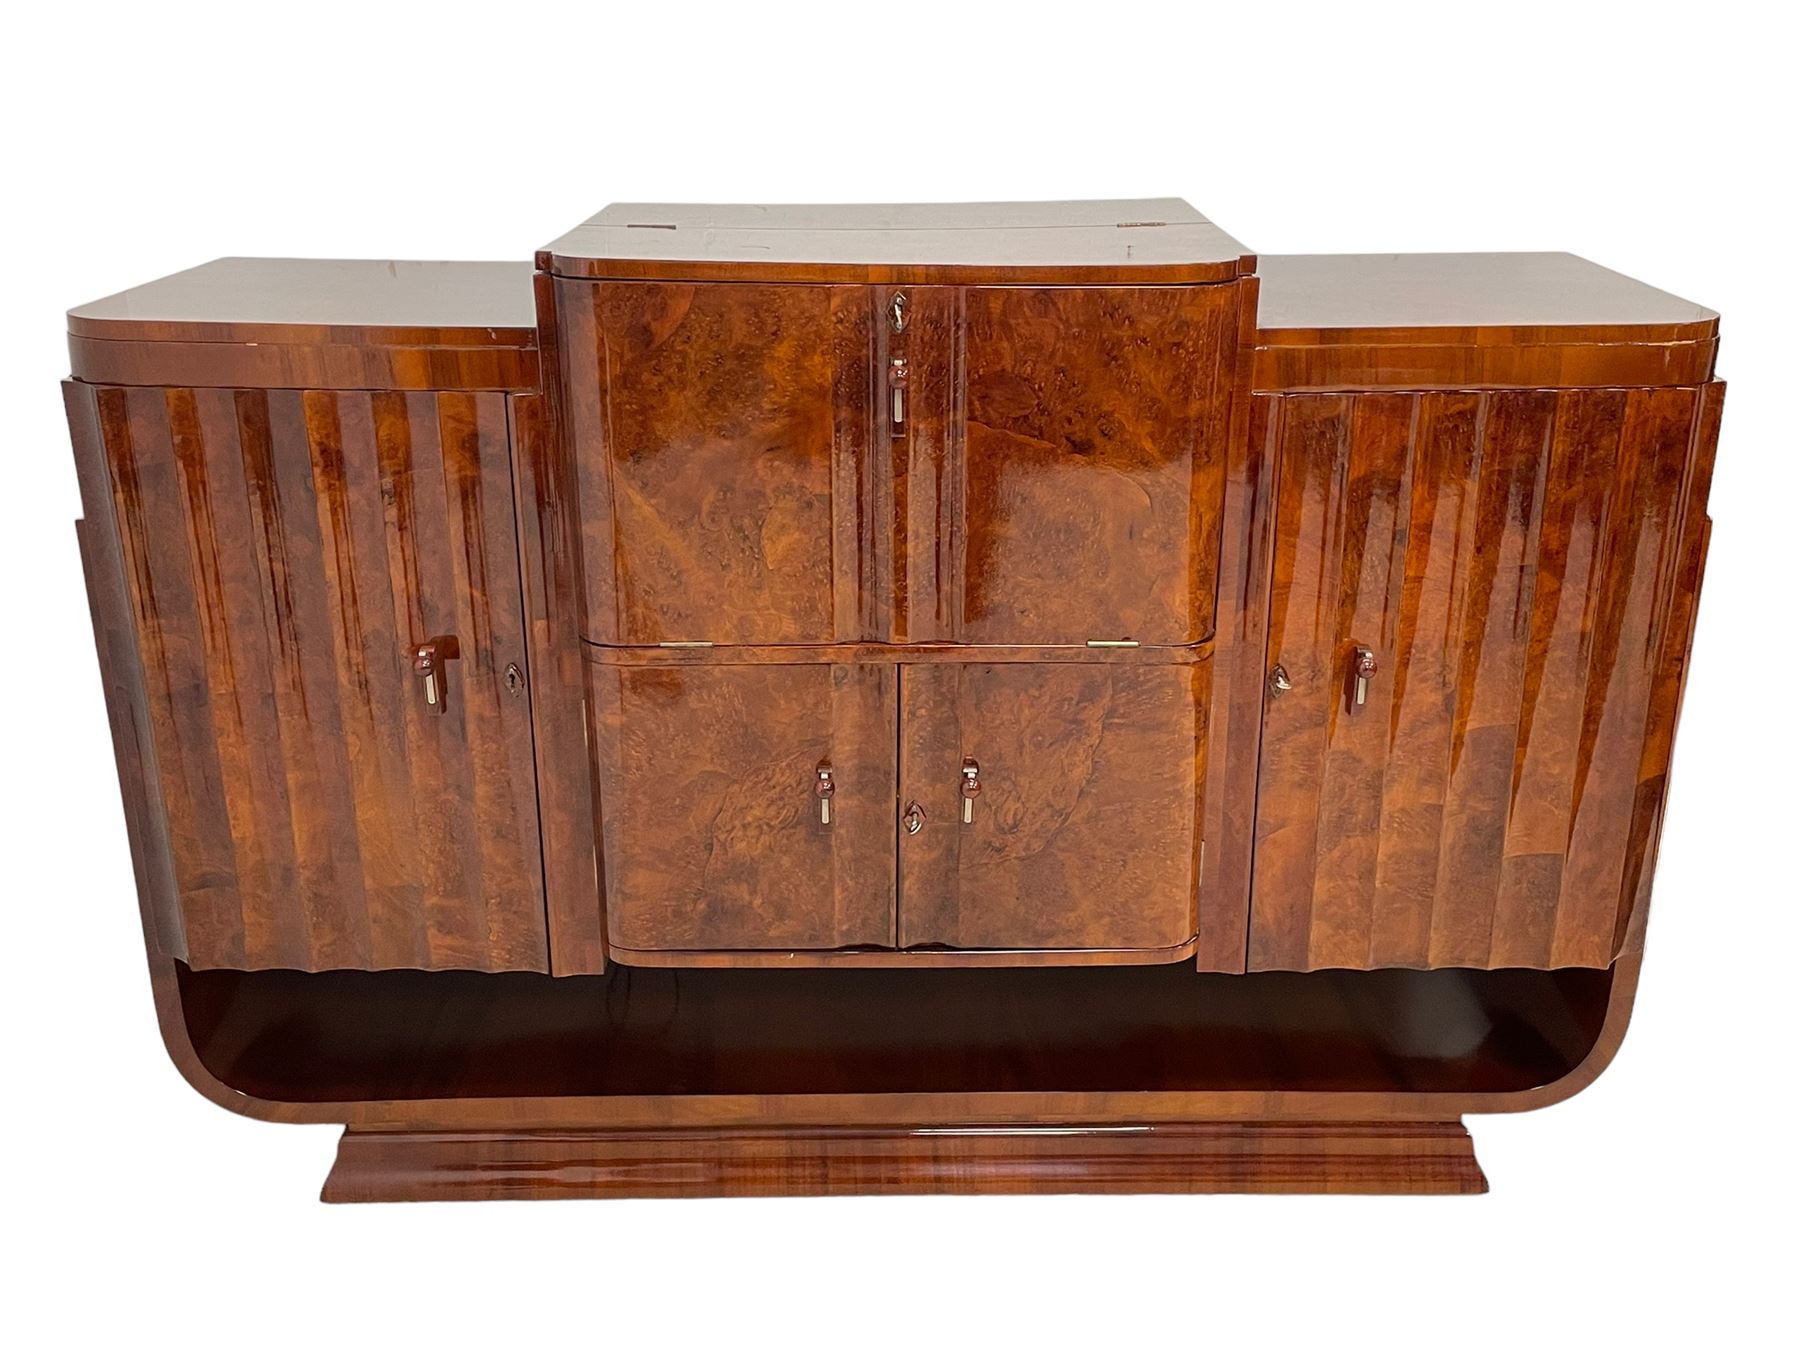 Attributed to Harry & Lou Epstein - Art Deco circa. 1930s figured walnut sideboard - Image 3 of 17